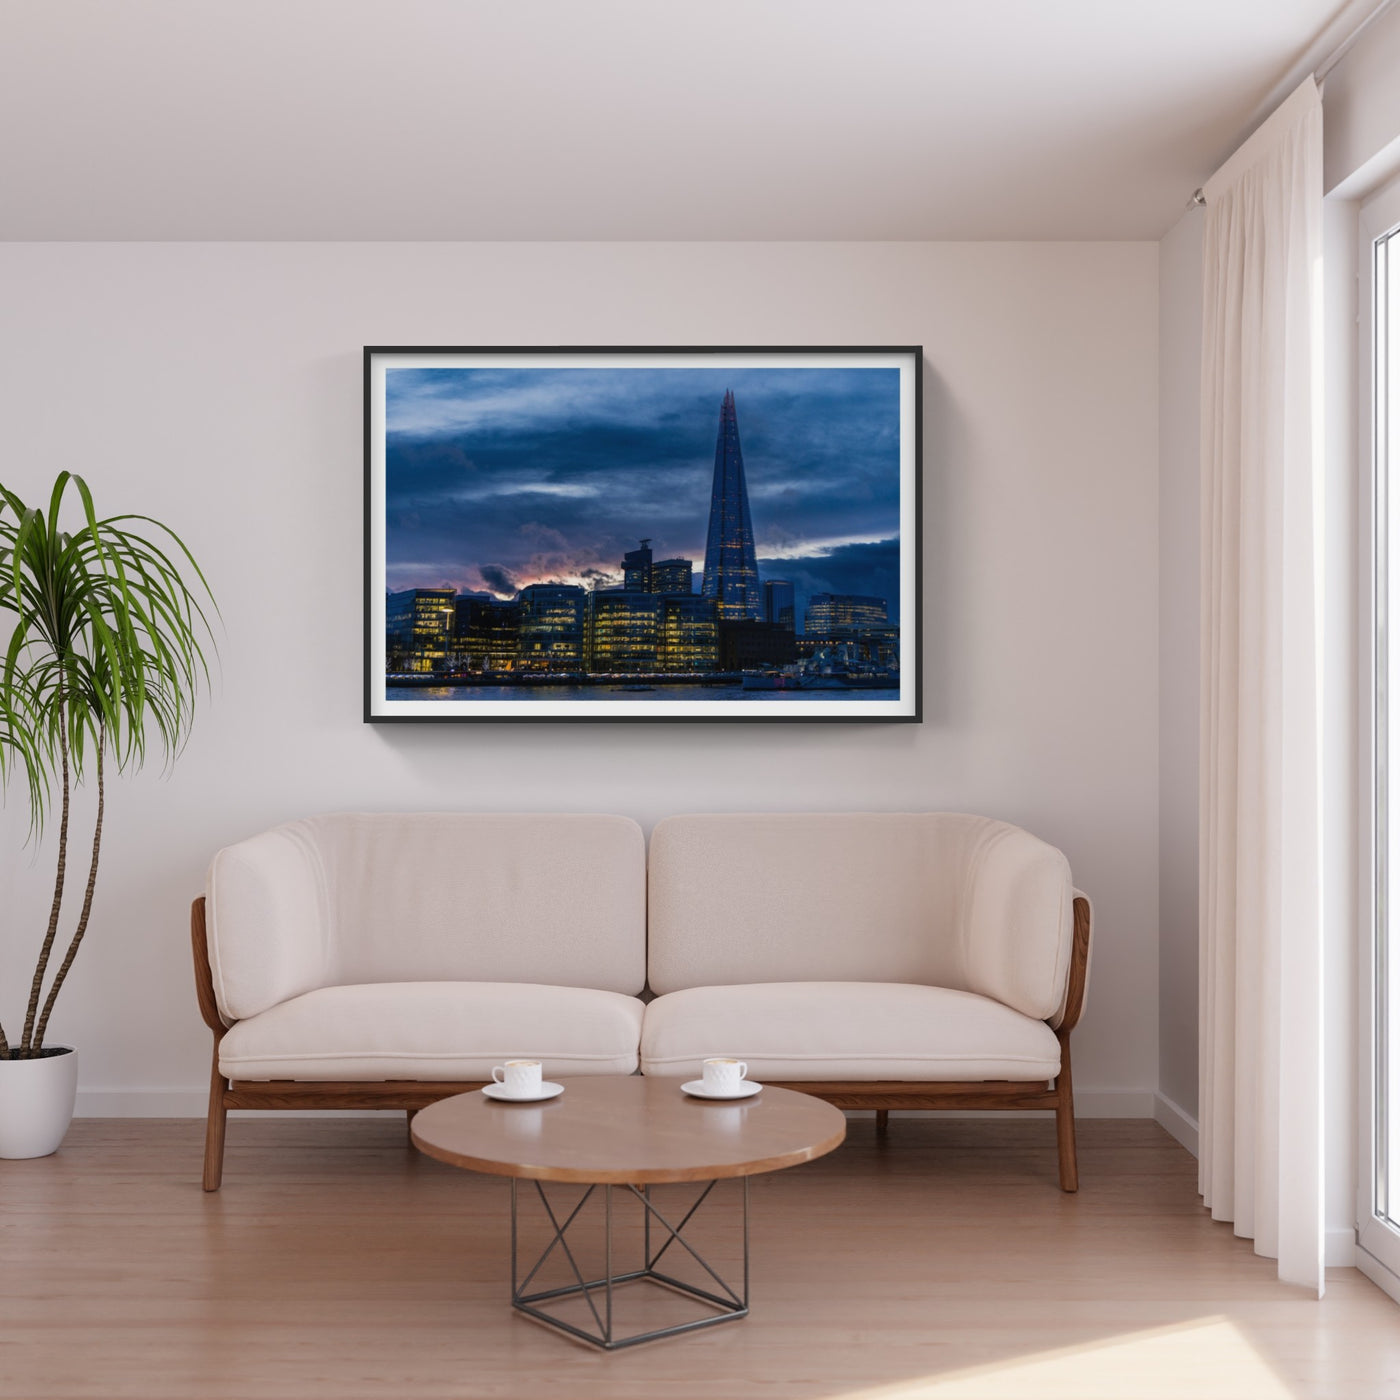 The Shard building in London, England with blue and purple sunset photo above white couch